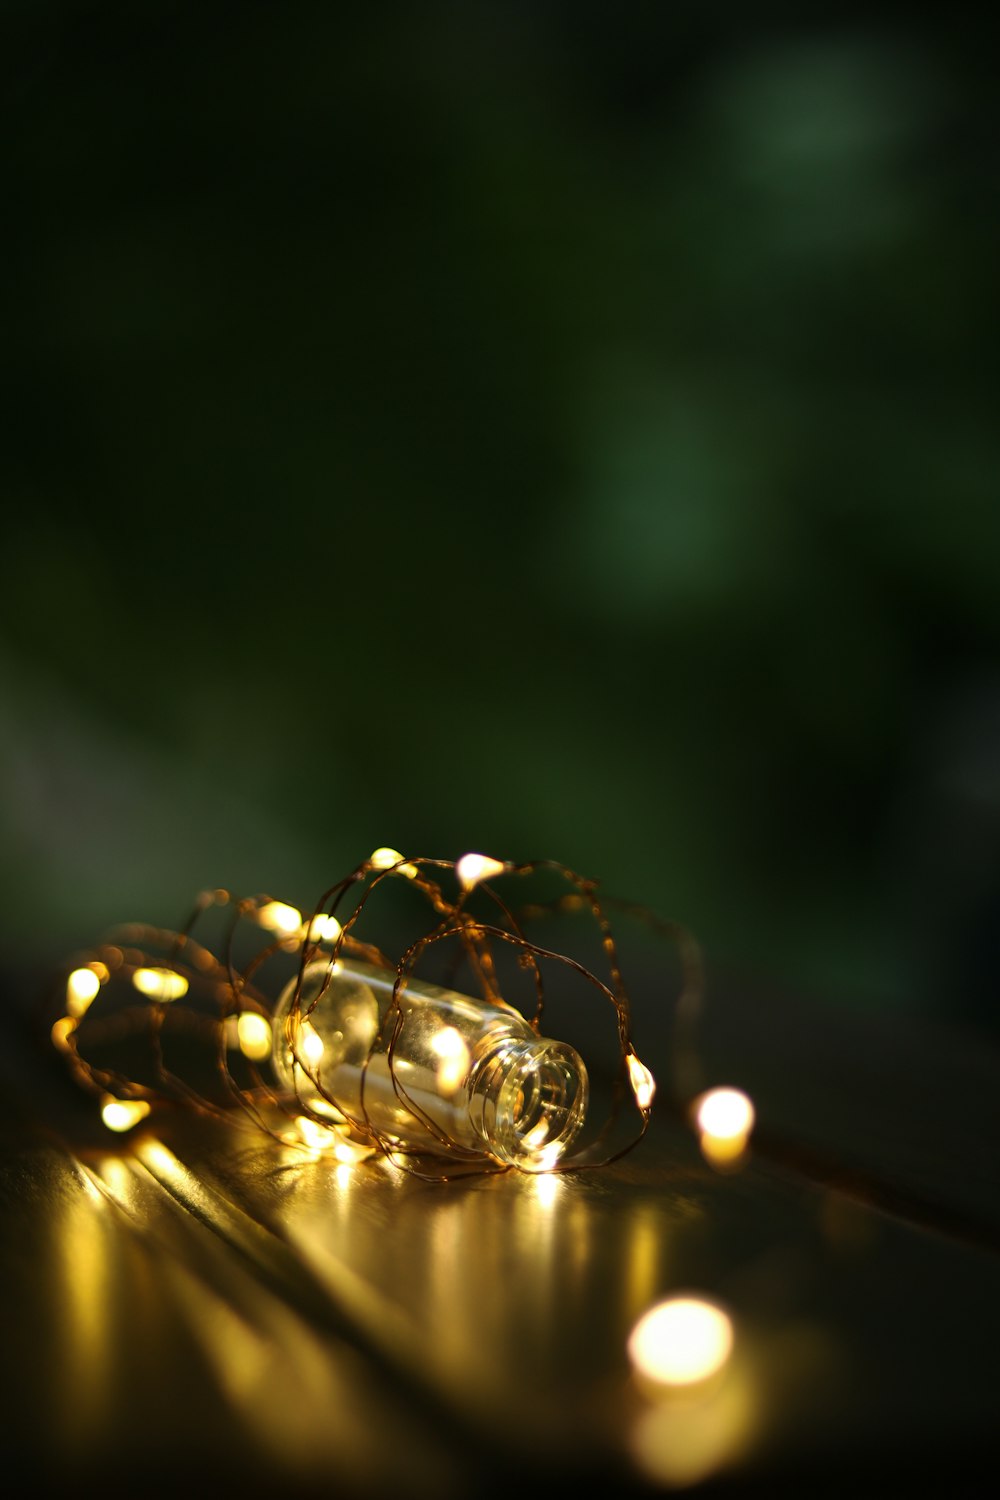 bokeh photography of yellow string lights and clear glass vial